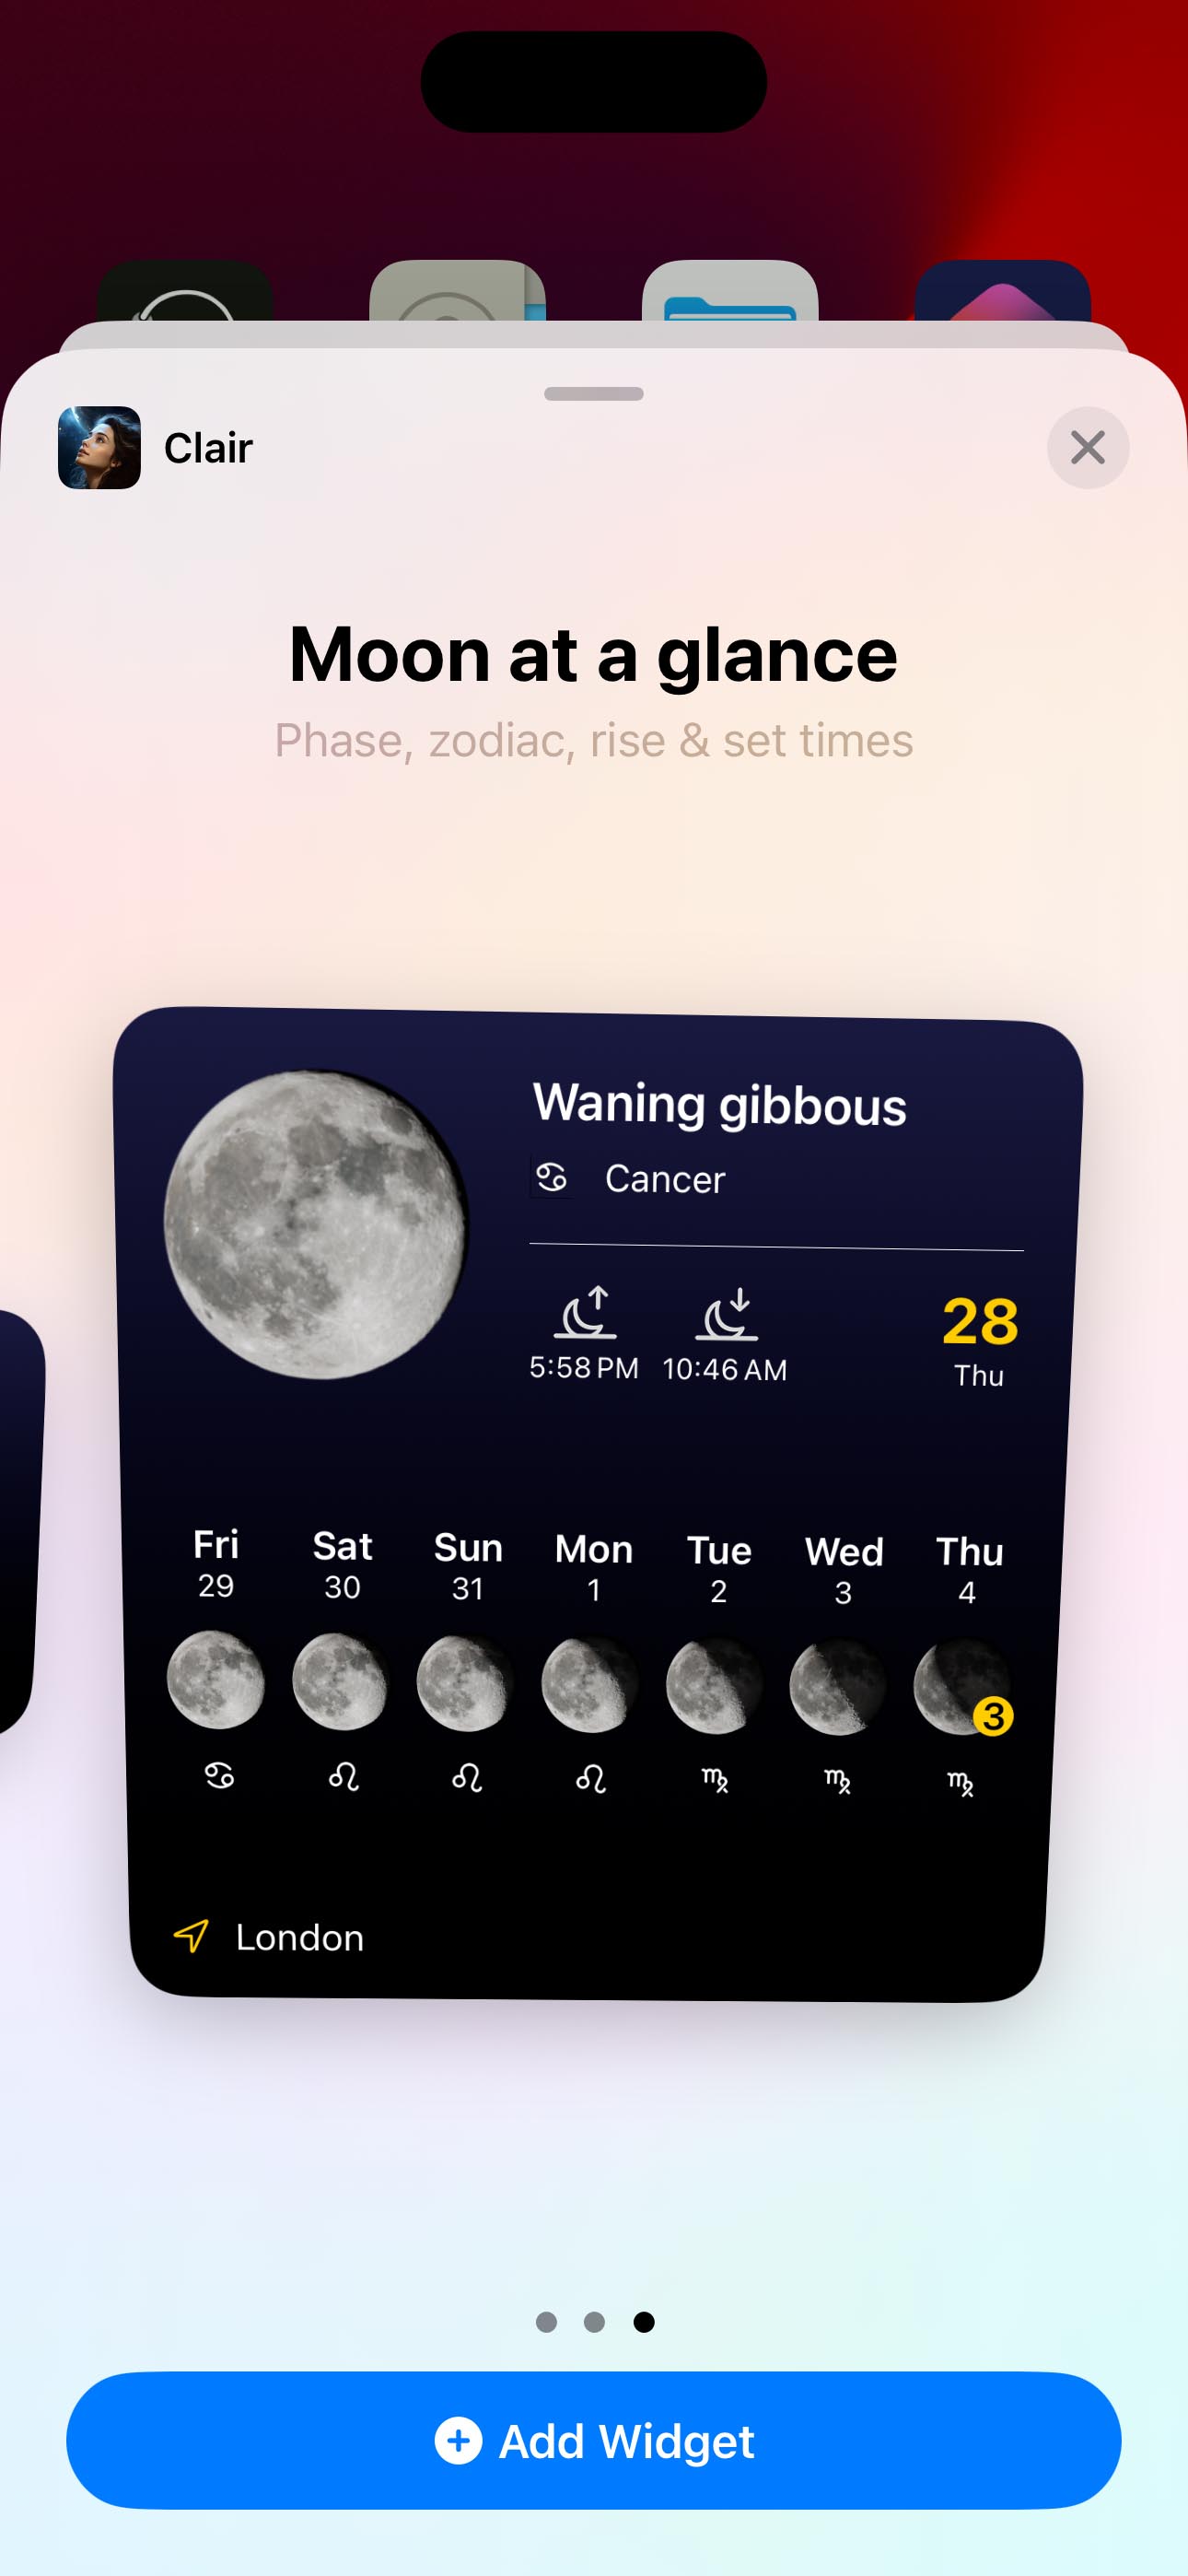 Select Widget to Add to iPhone Homescreen